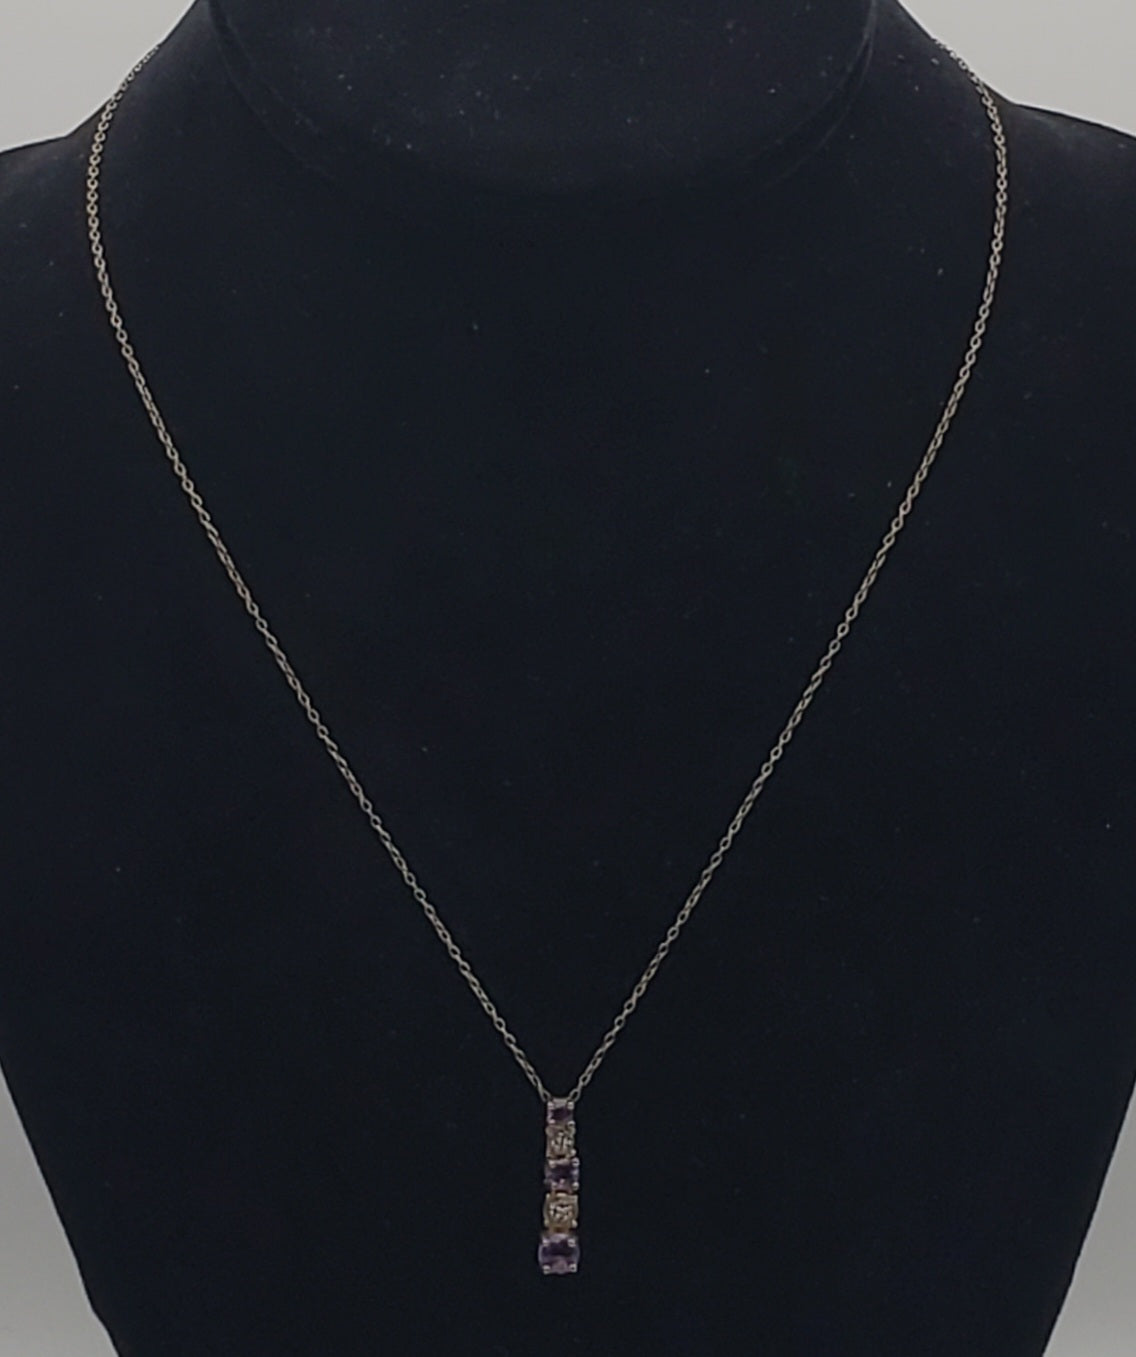 Ross-Simons - Amethyst and Diamond Gold Tone Sterling Silver Pendant on Chain Necklace - 18"